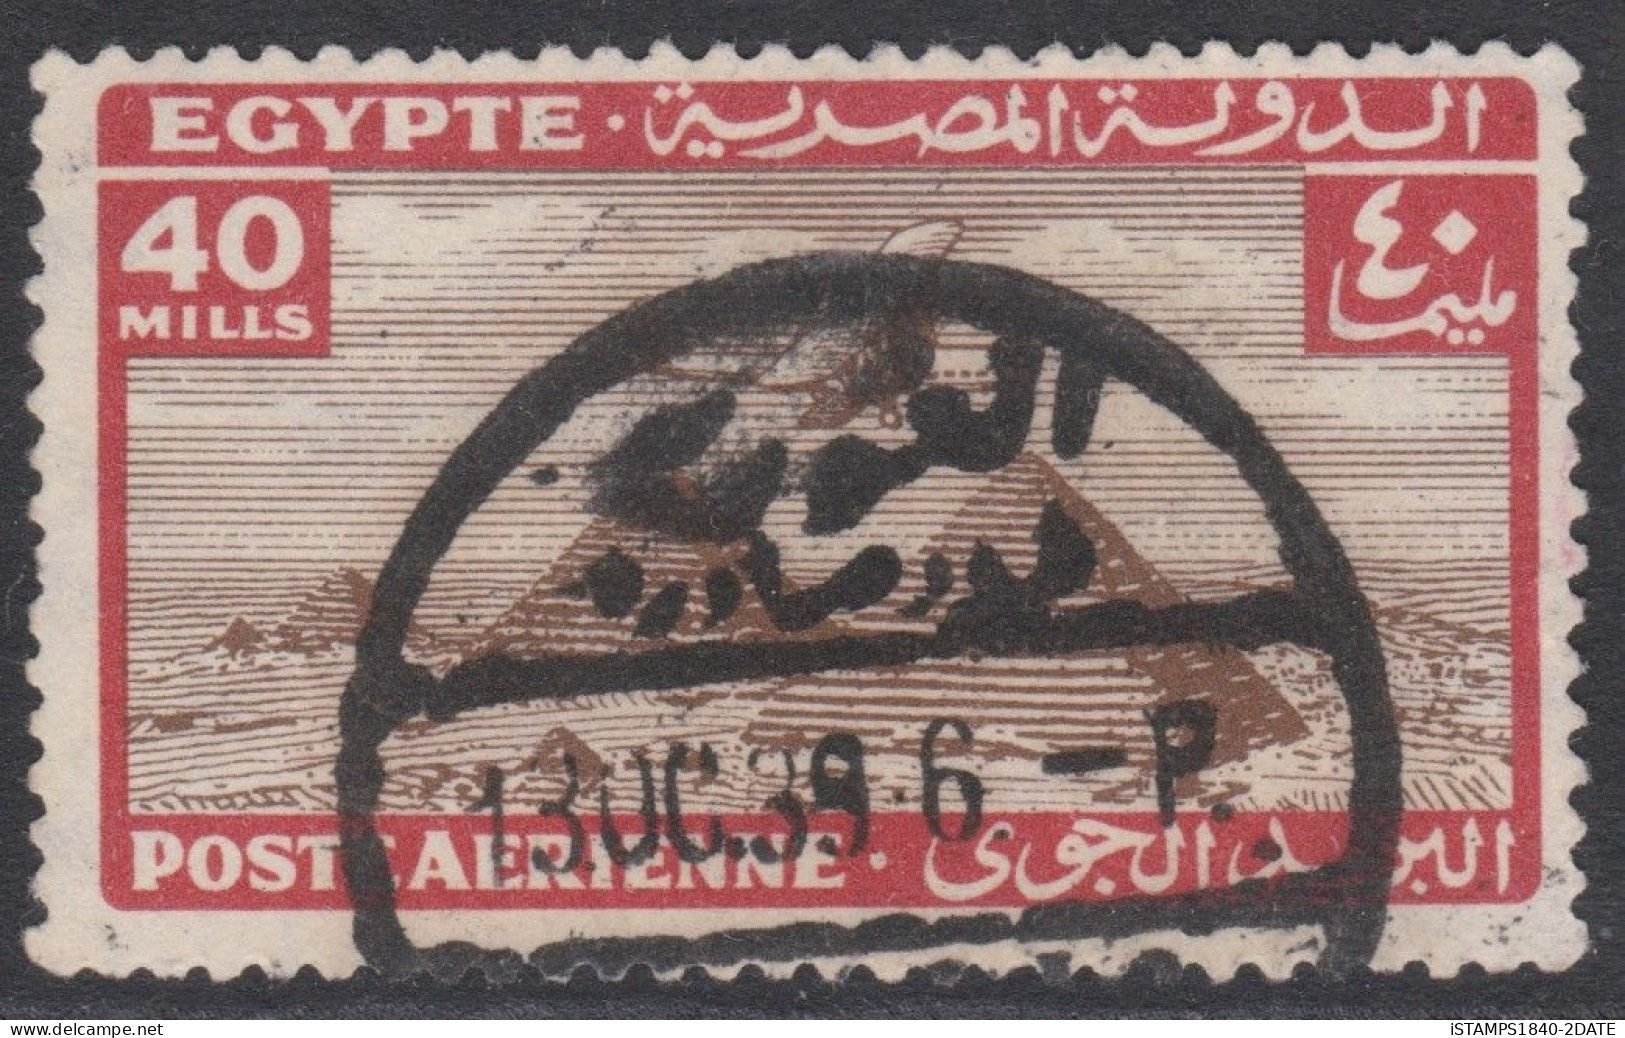 00678/ Egypt 1934/38 Air Mail 40m Used Plane Over Pyramid - Luftpost